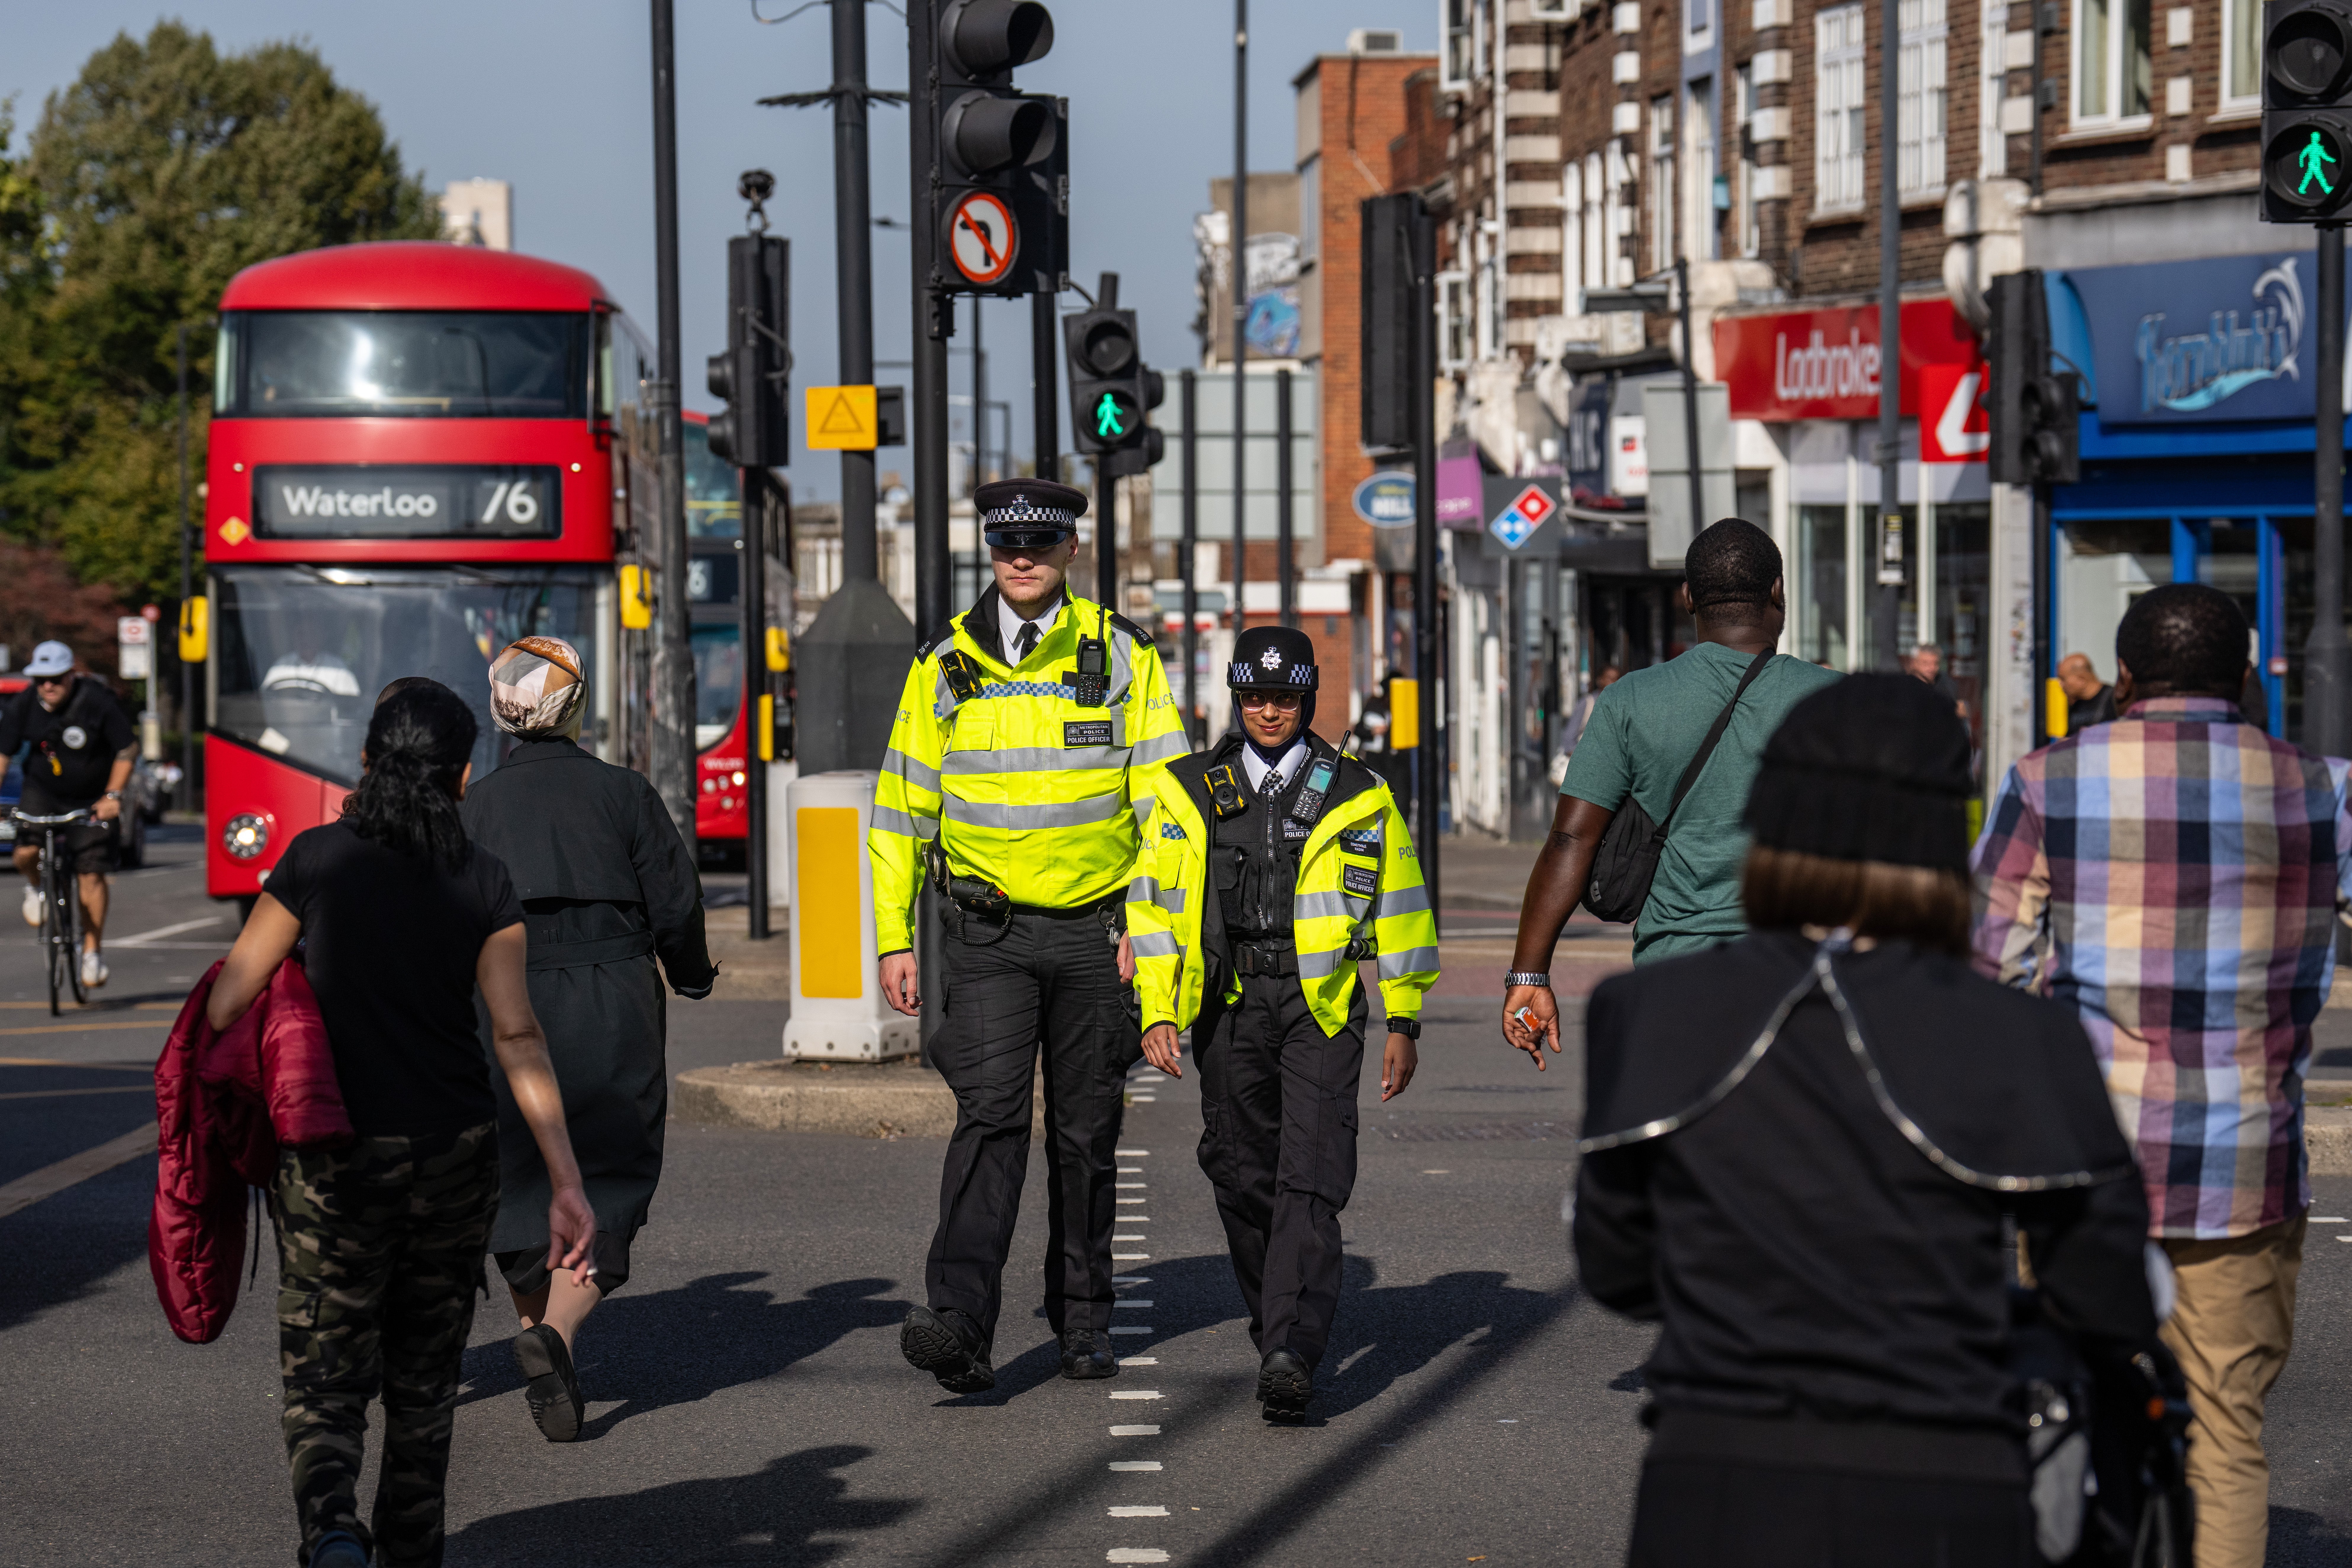 Police officers patrol through Stamford Hill, an area of London with a large Jewish community, in October